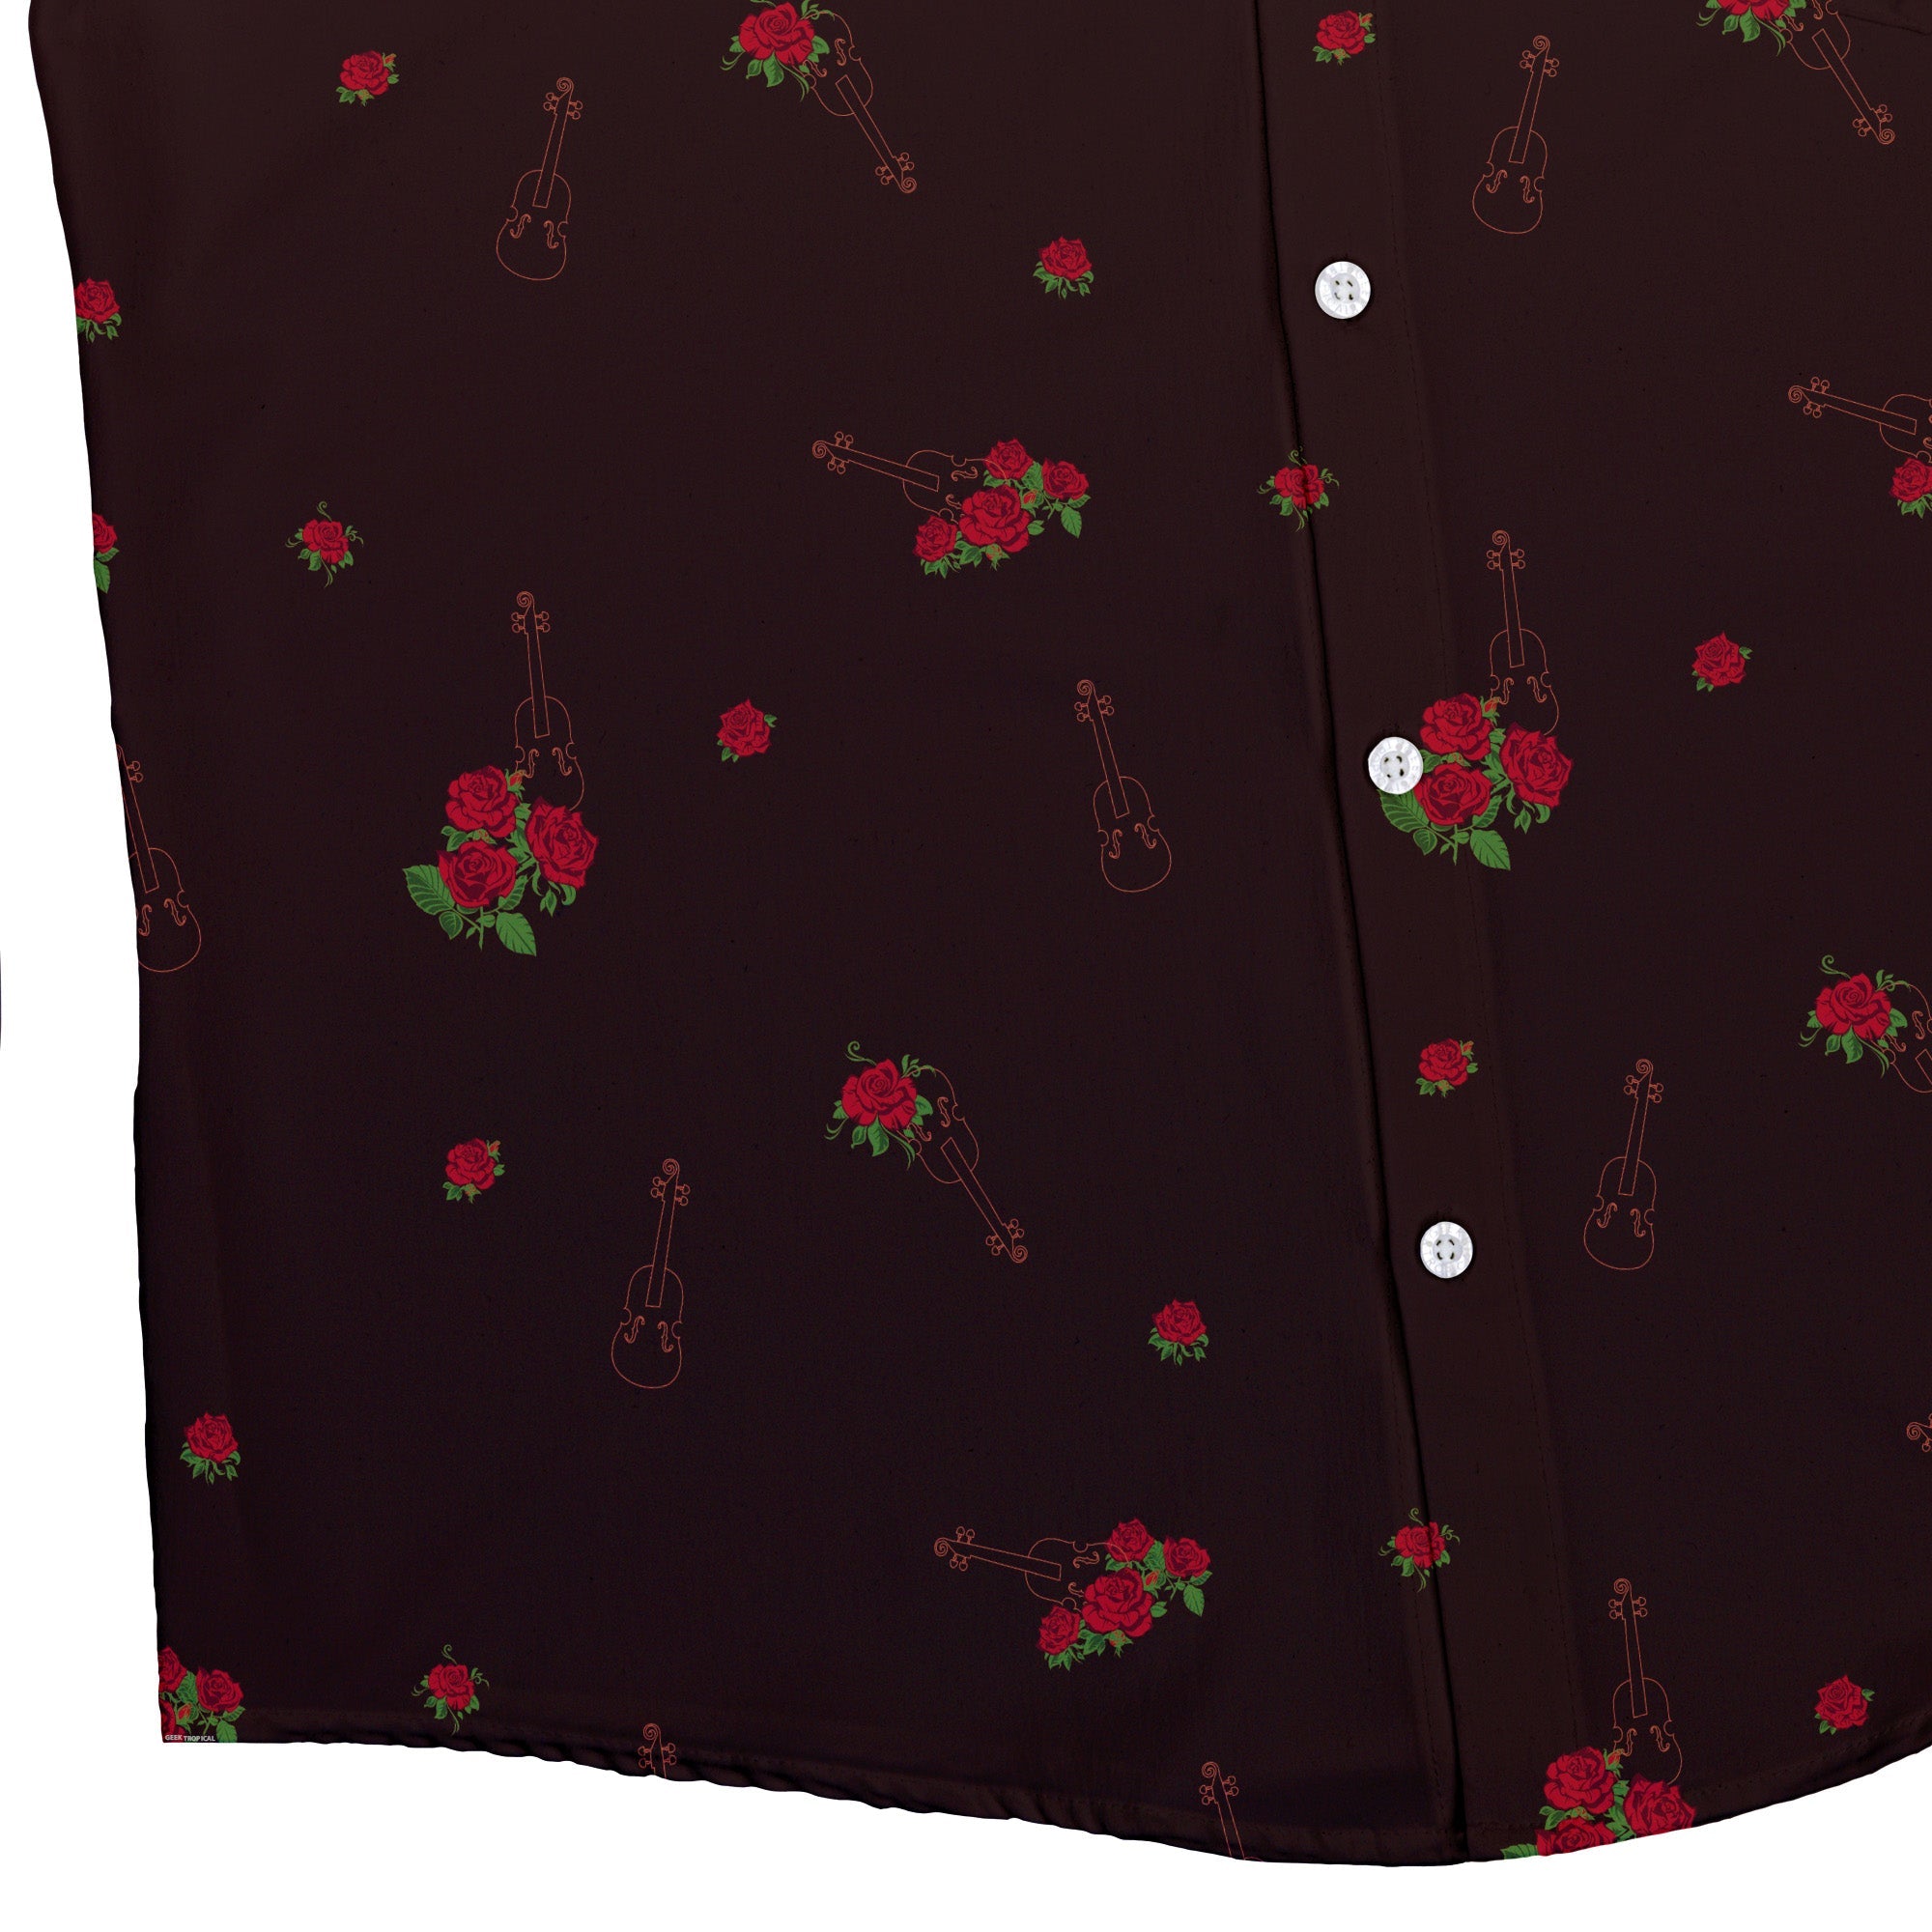 Floral Violin Melody Button Up Shirt - adult sizing - Design by Dunking Toast - music print